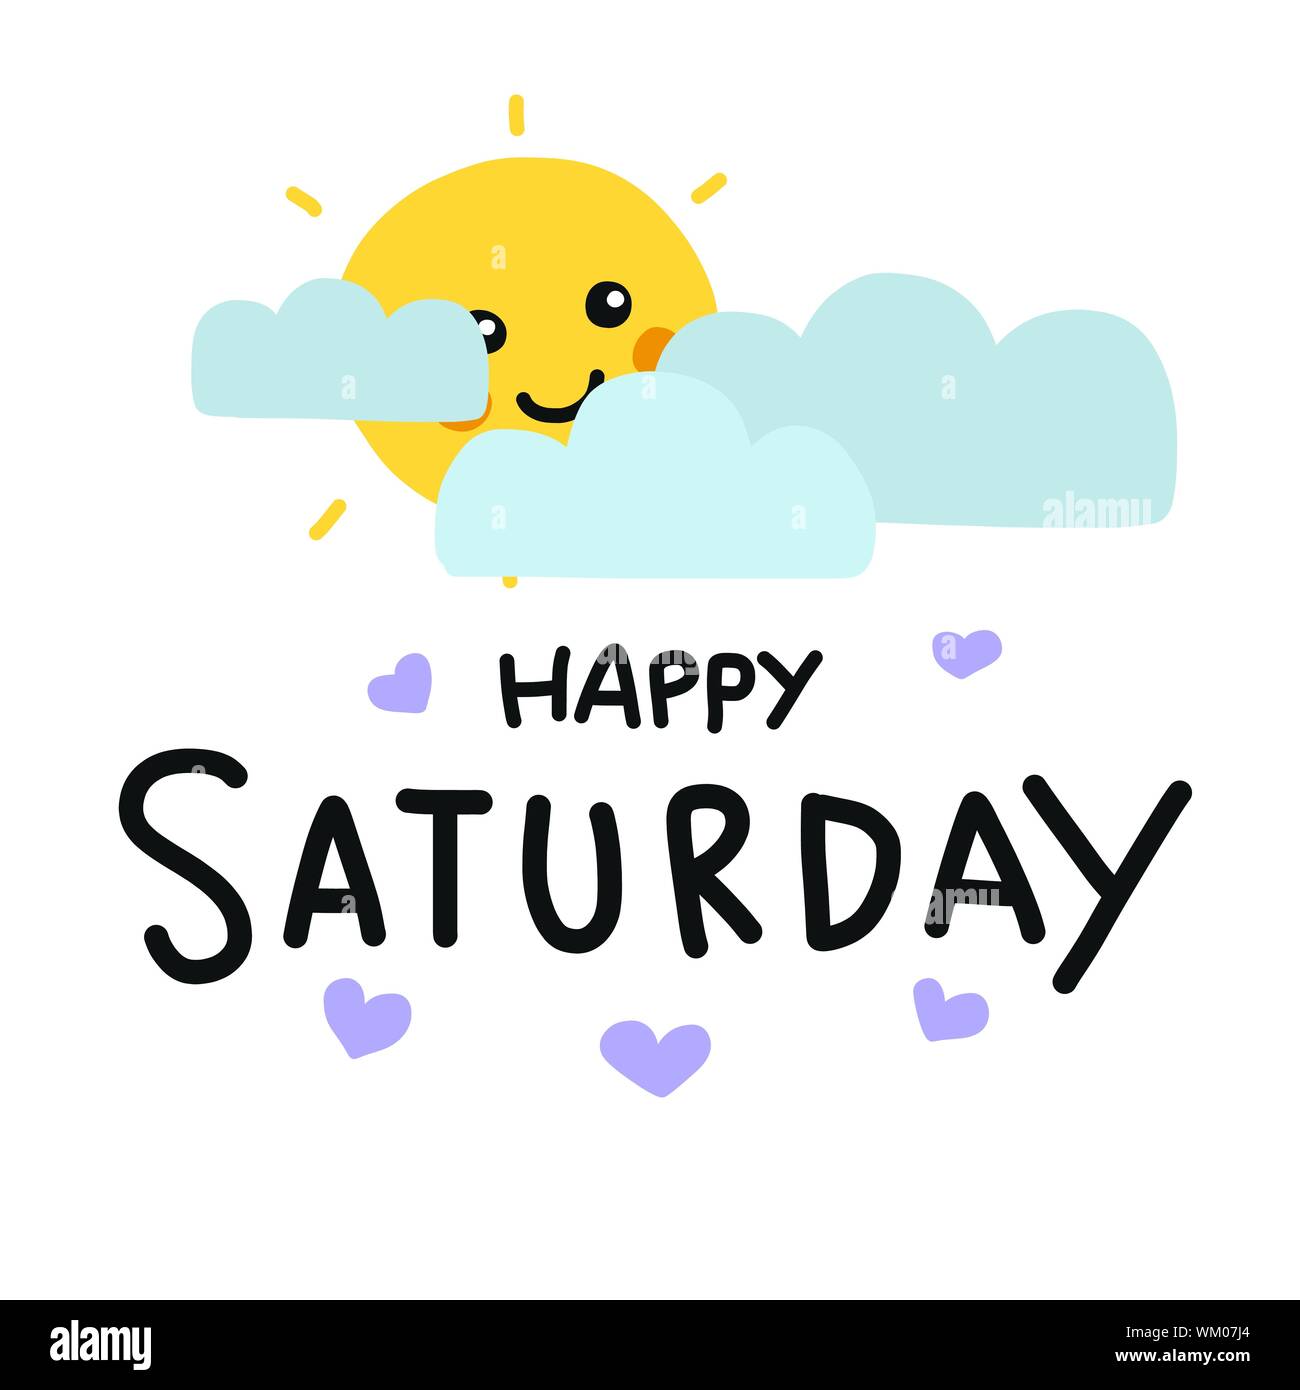 Saturday morning cartoon Cut Out Stock Images & Pictures - Alamy